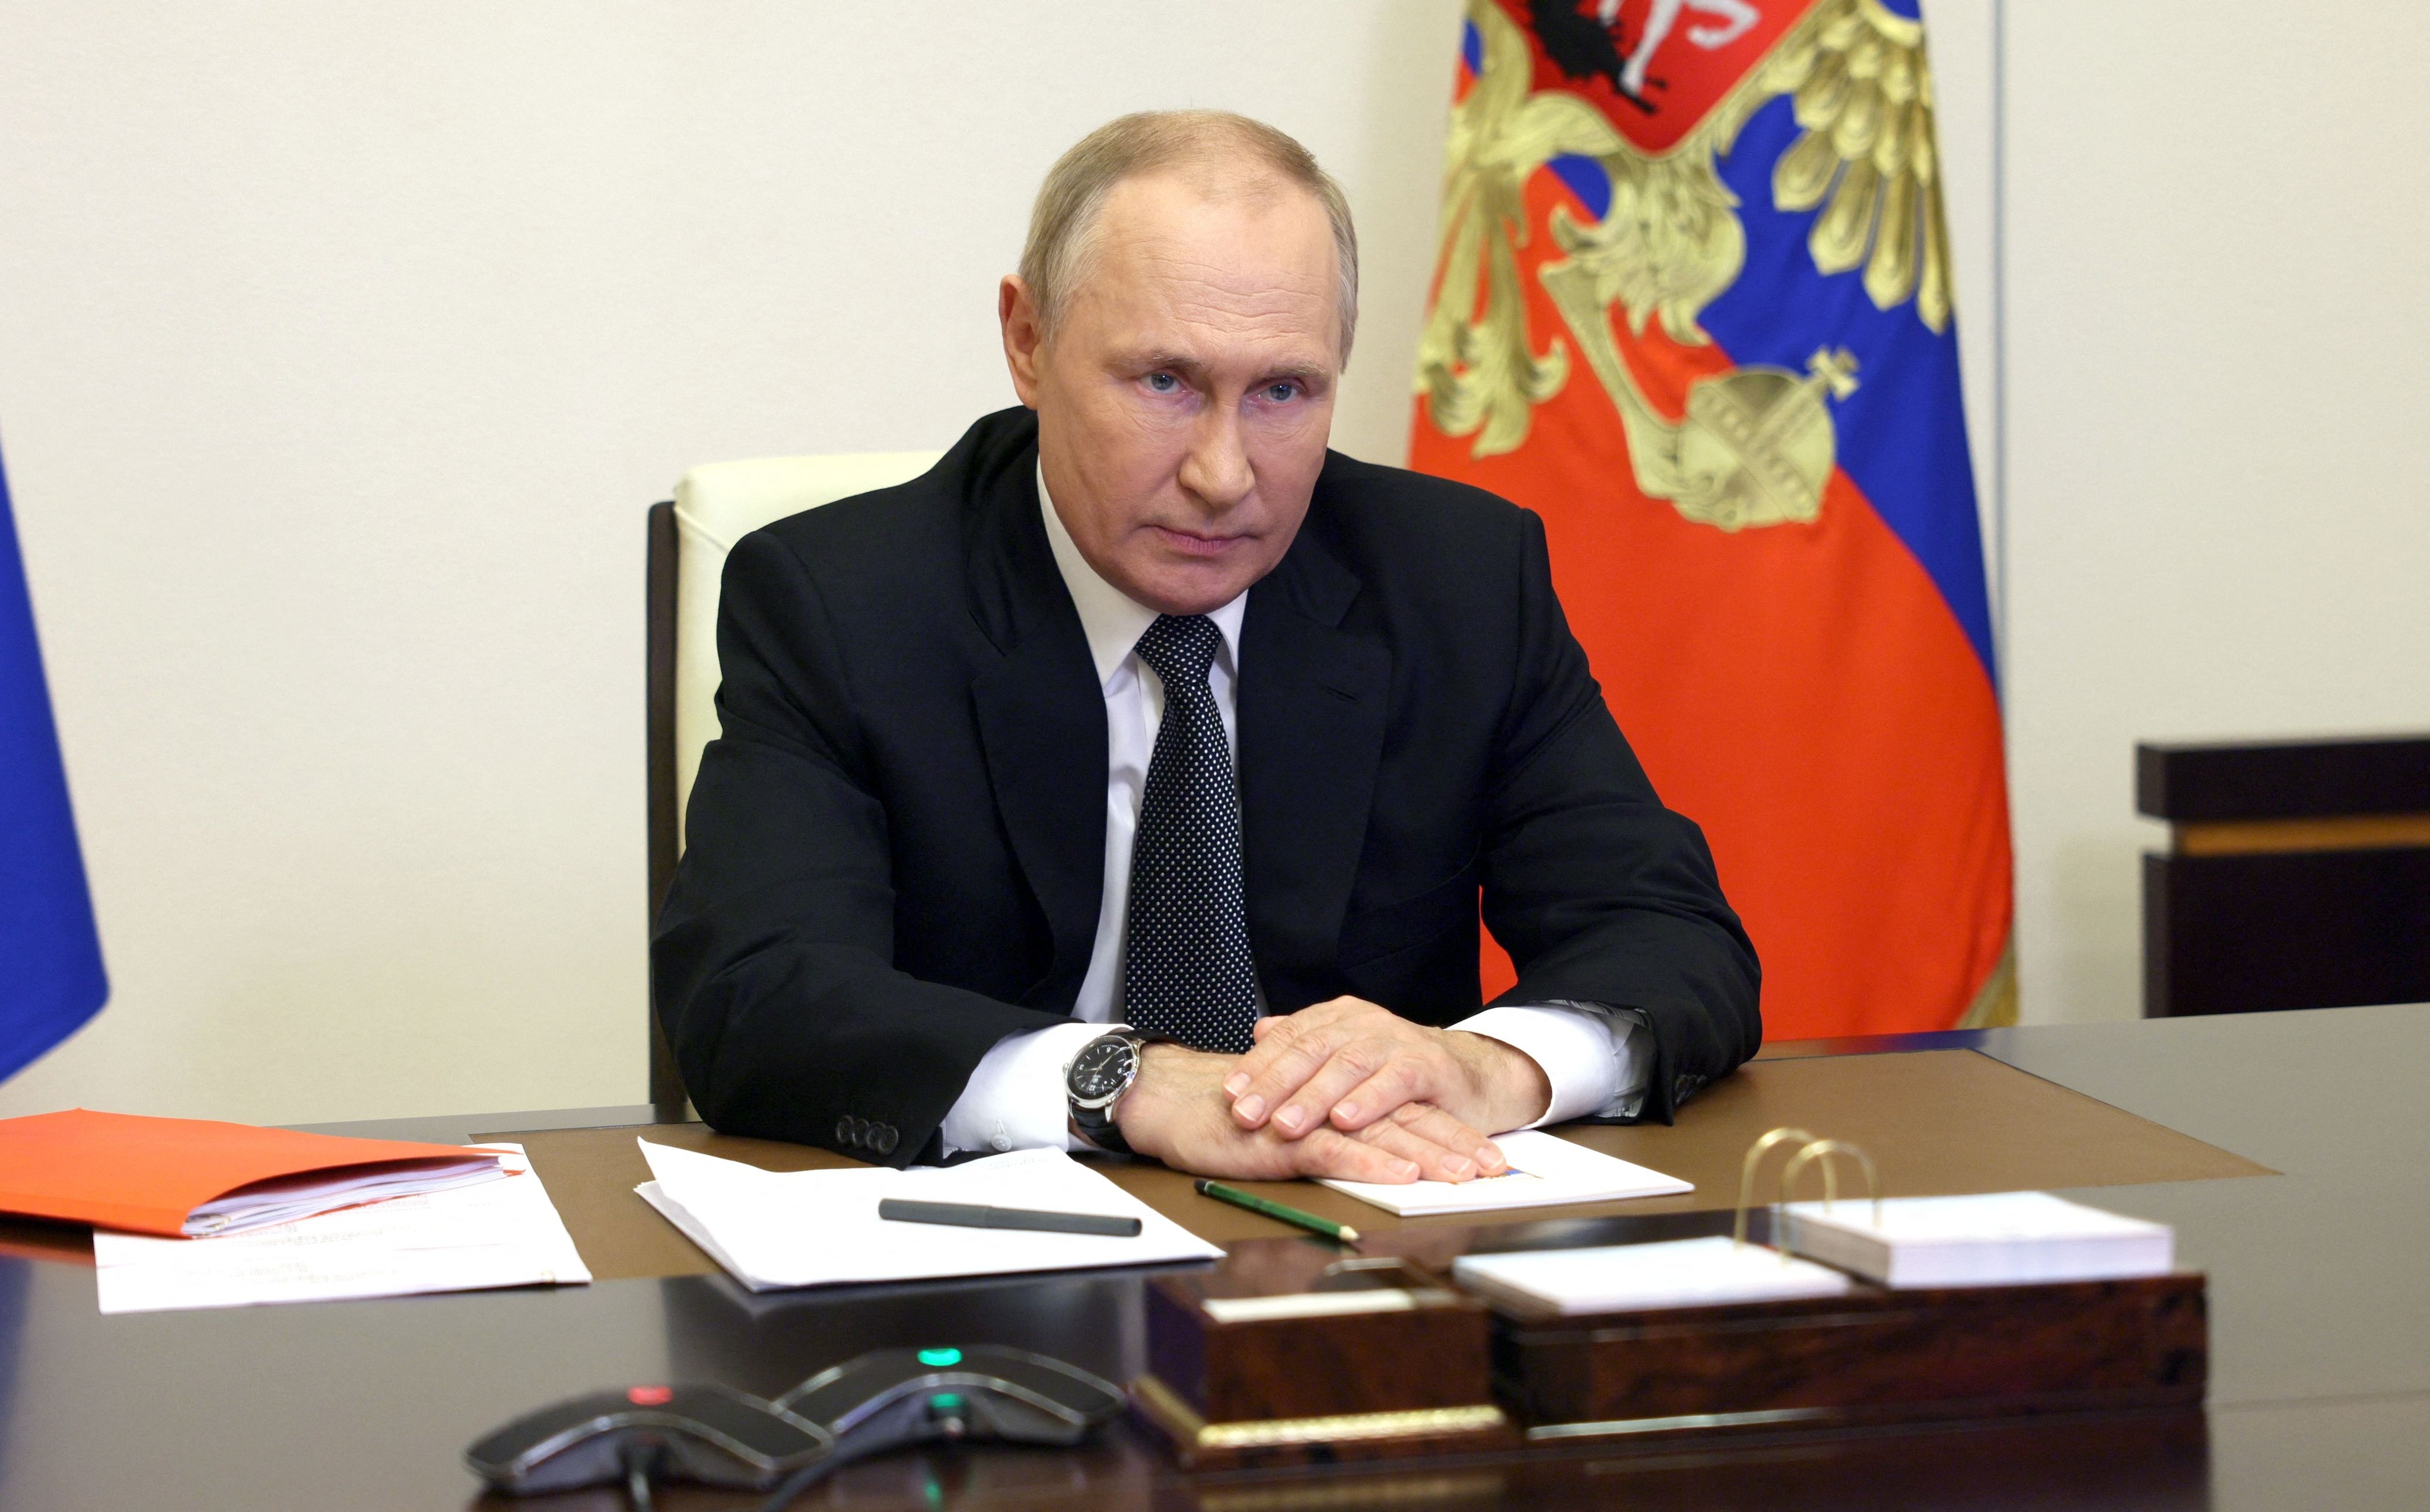 Nataliya Bugayova: Putin on track to disappoint multiple competing factions in Russia